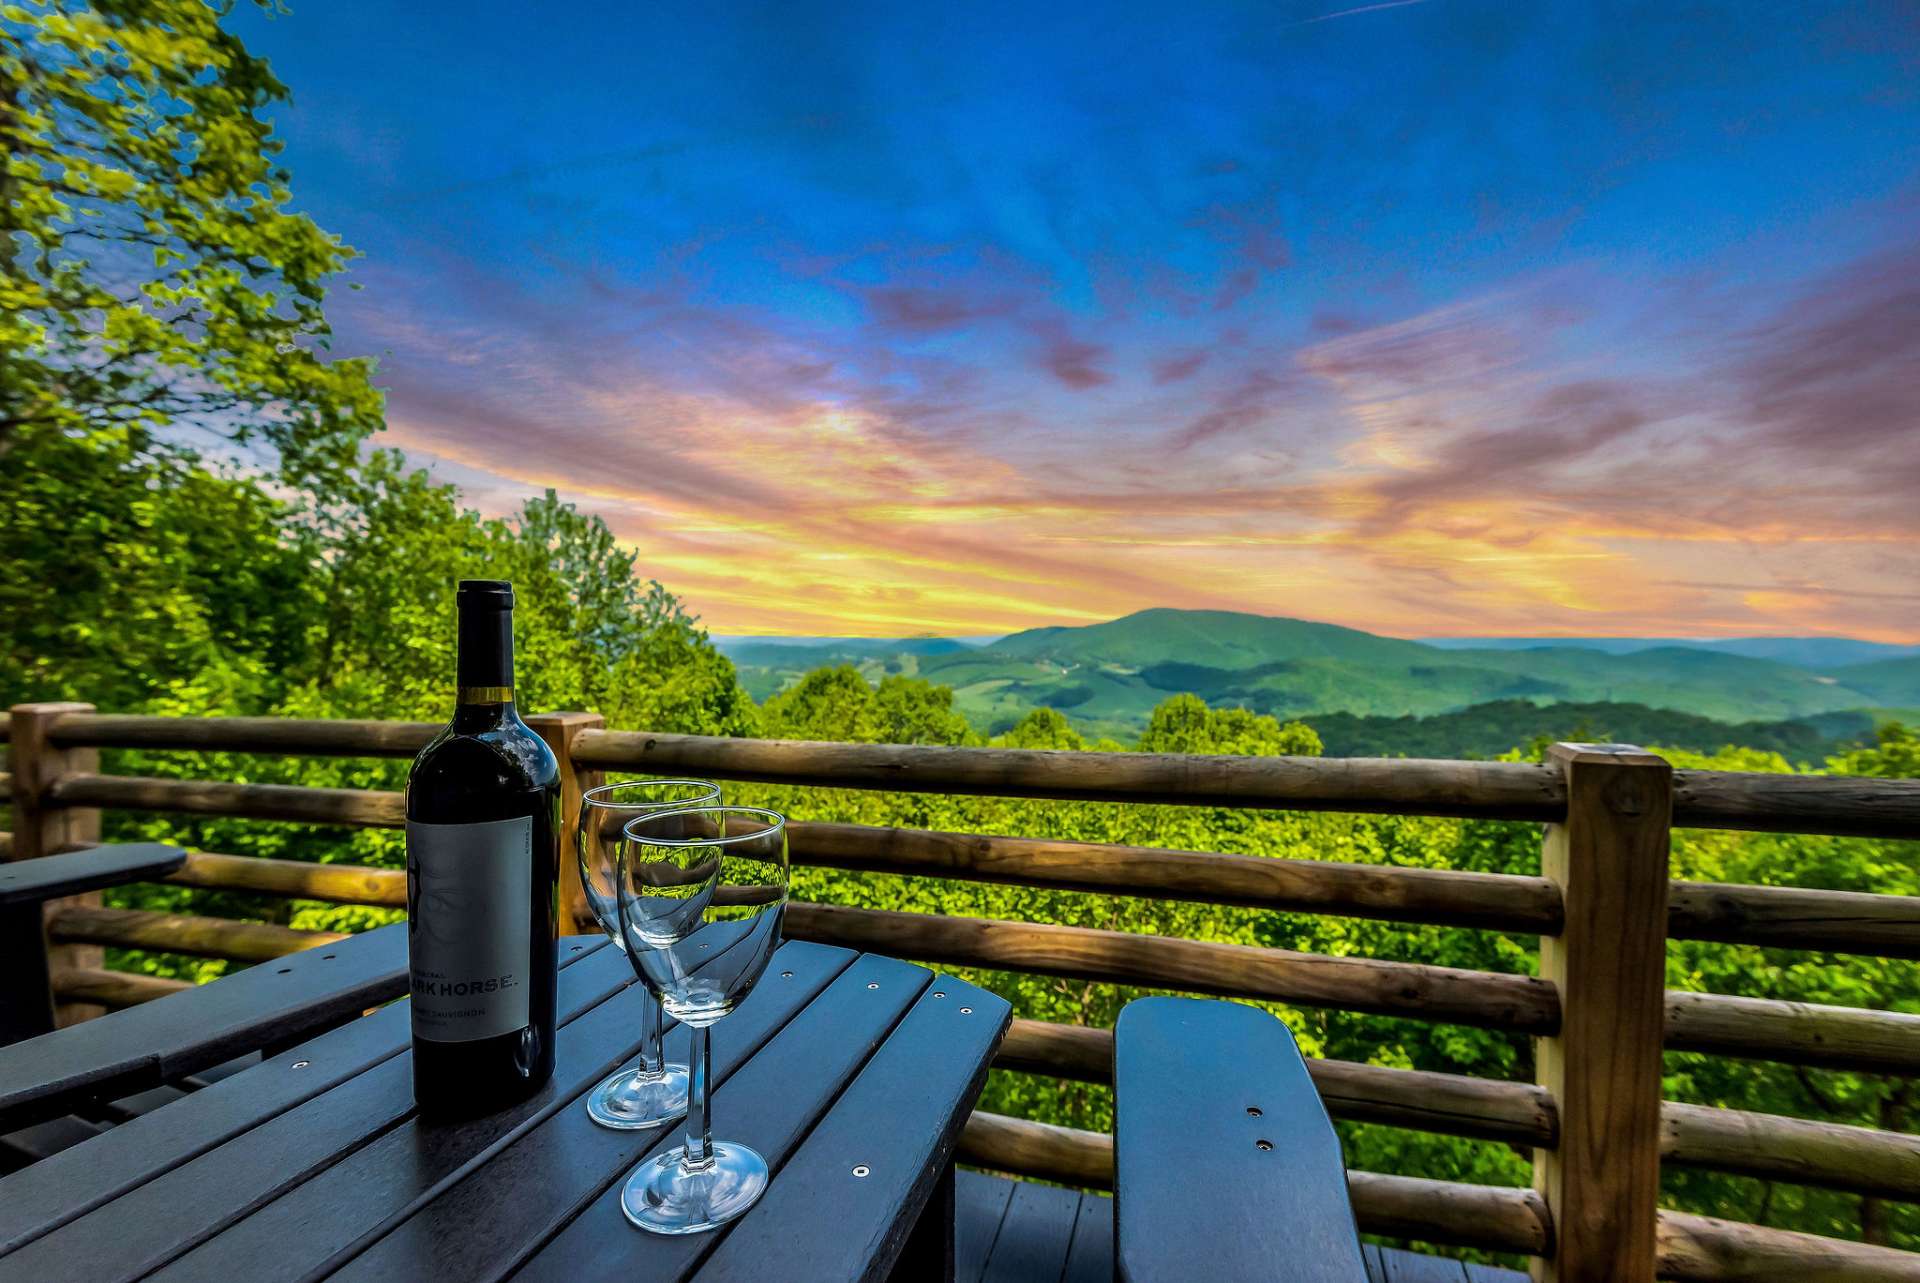 Witness some of the most beautiful sunrises imaginable and magnificent cloud formations across the Blue Ridge Mountains on east-facing decks.